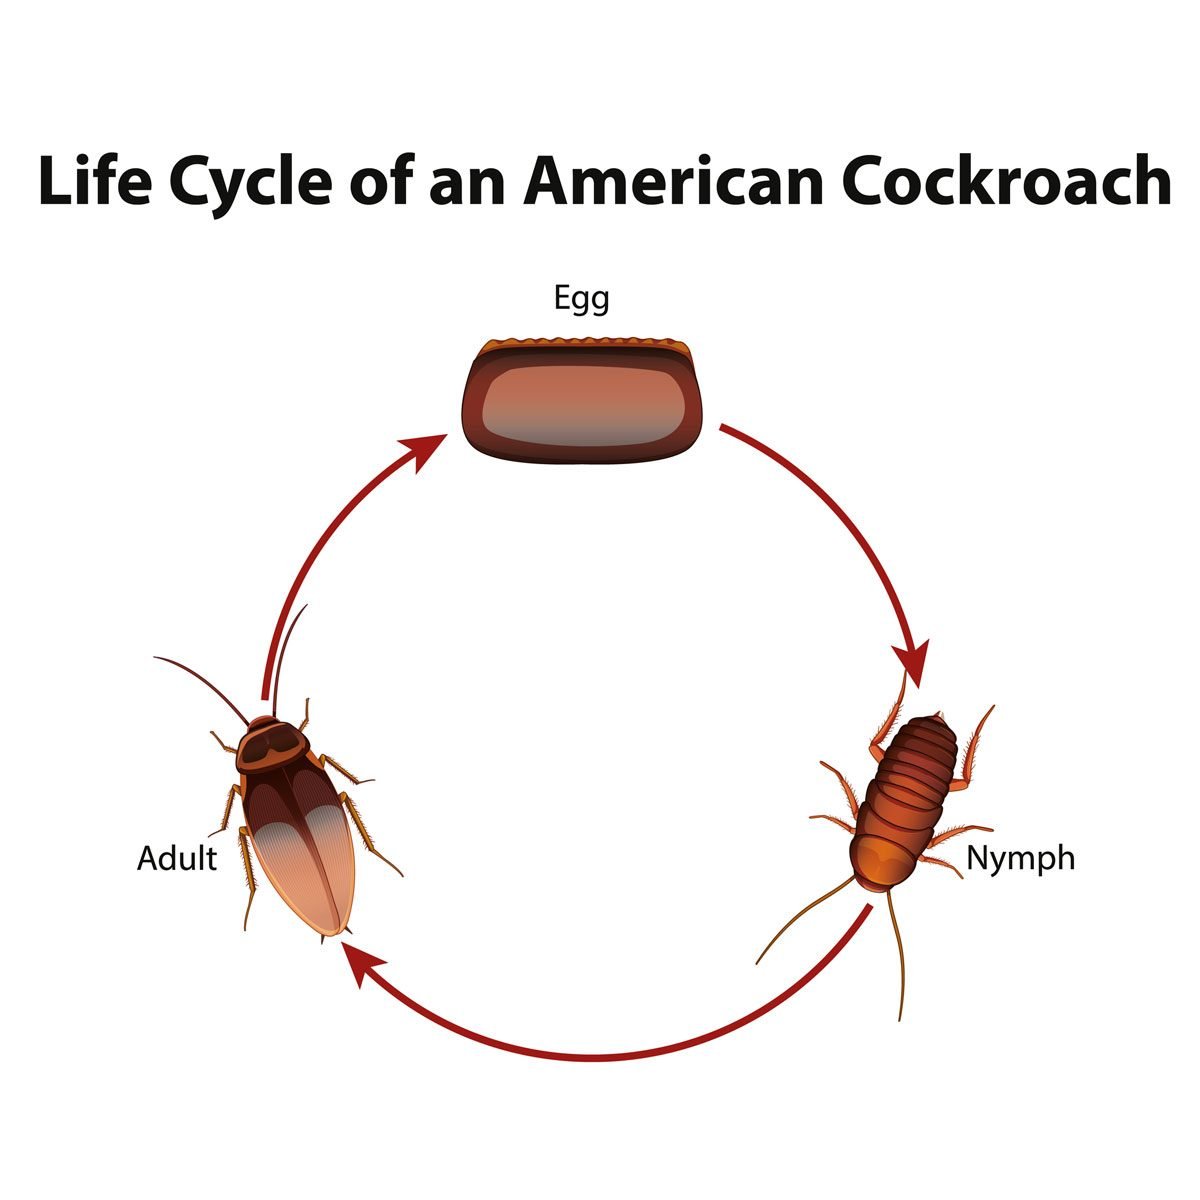 Cockroach S Life Cycle Egg Baby And Adult Stages